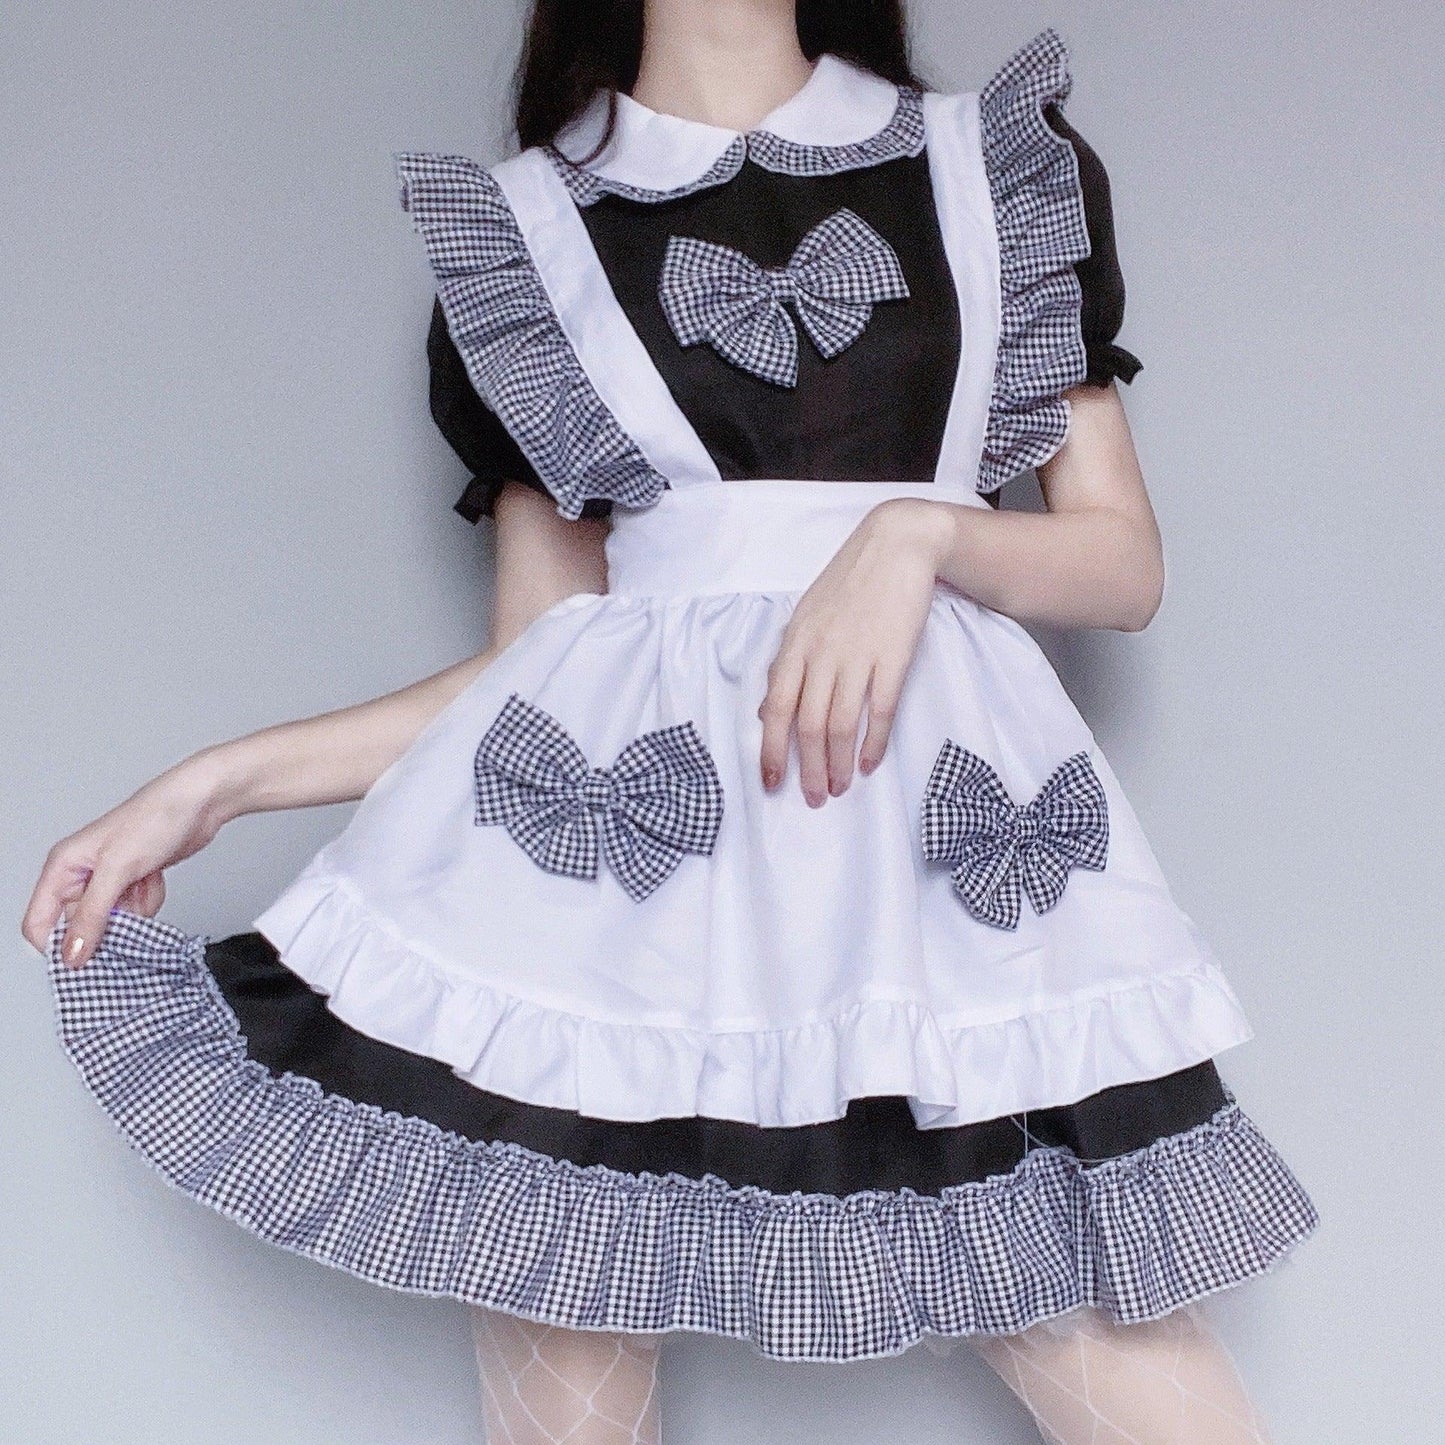 Celebrity Cat Girl Black White Plaid Maid Outfit Lolita Dress Fancy Cosplay Costume